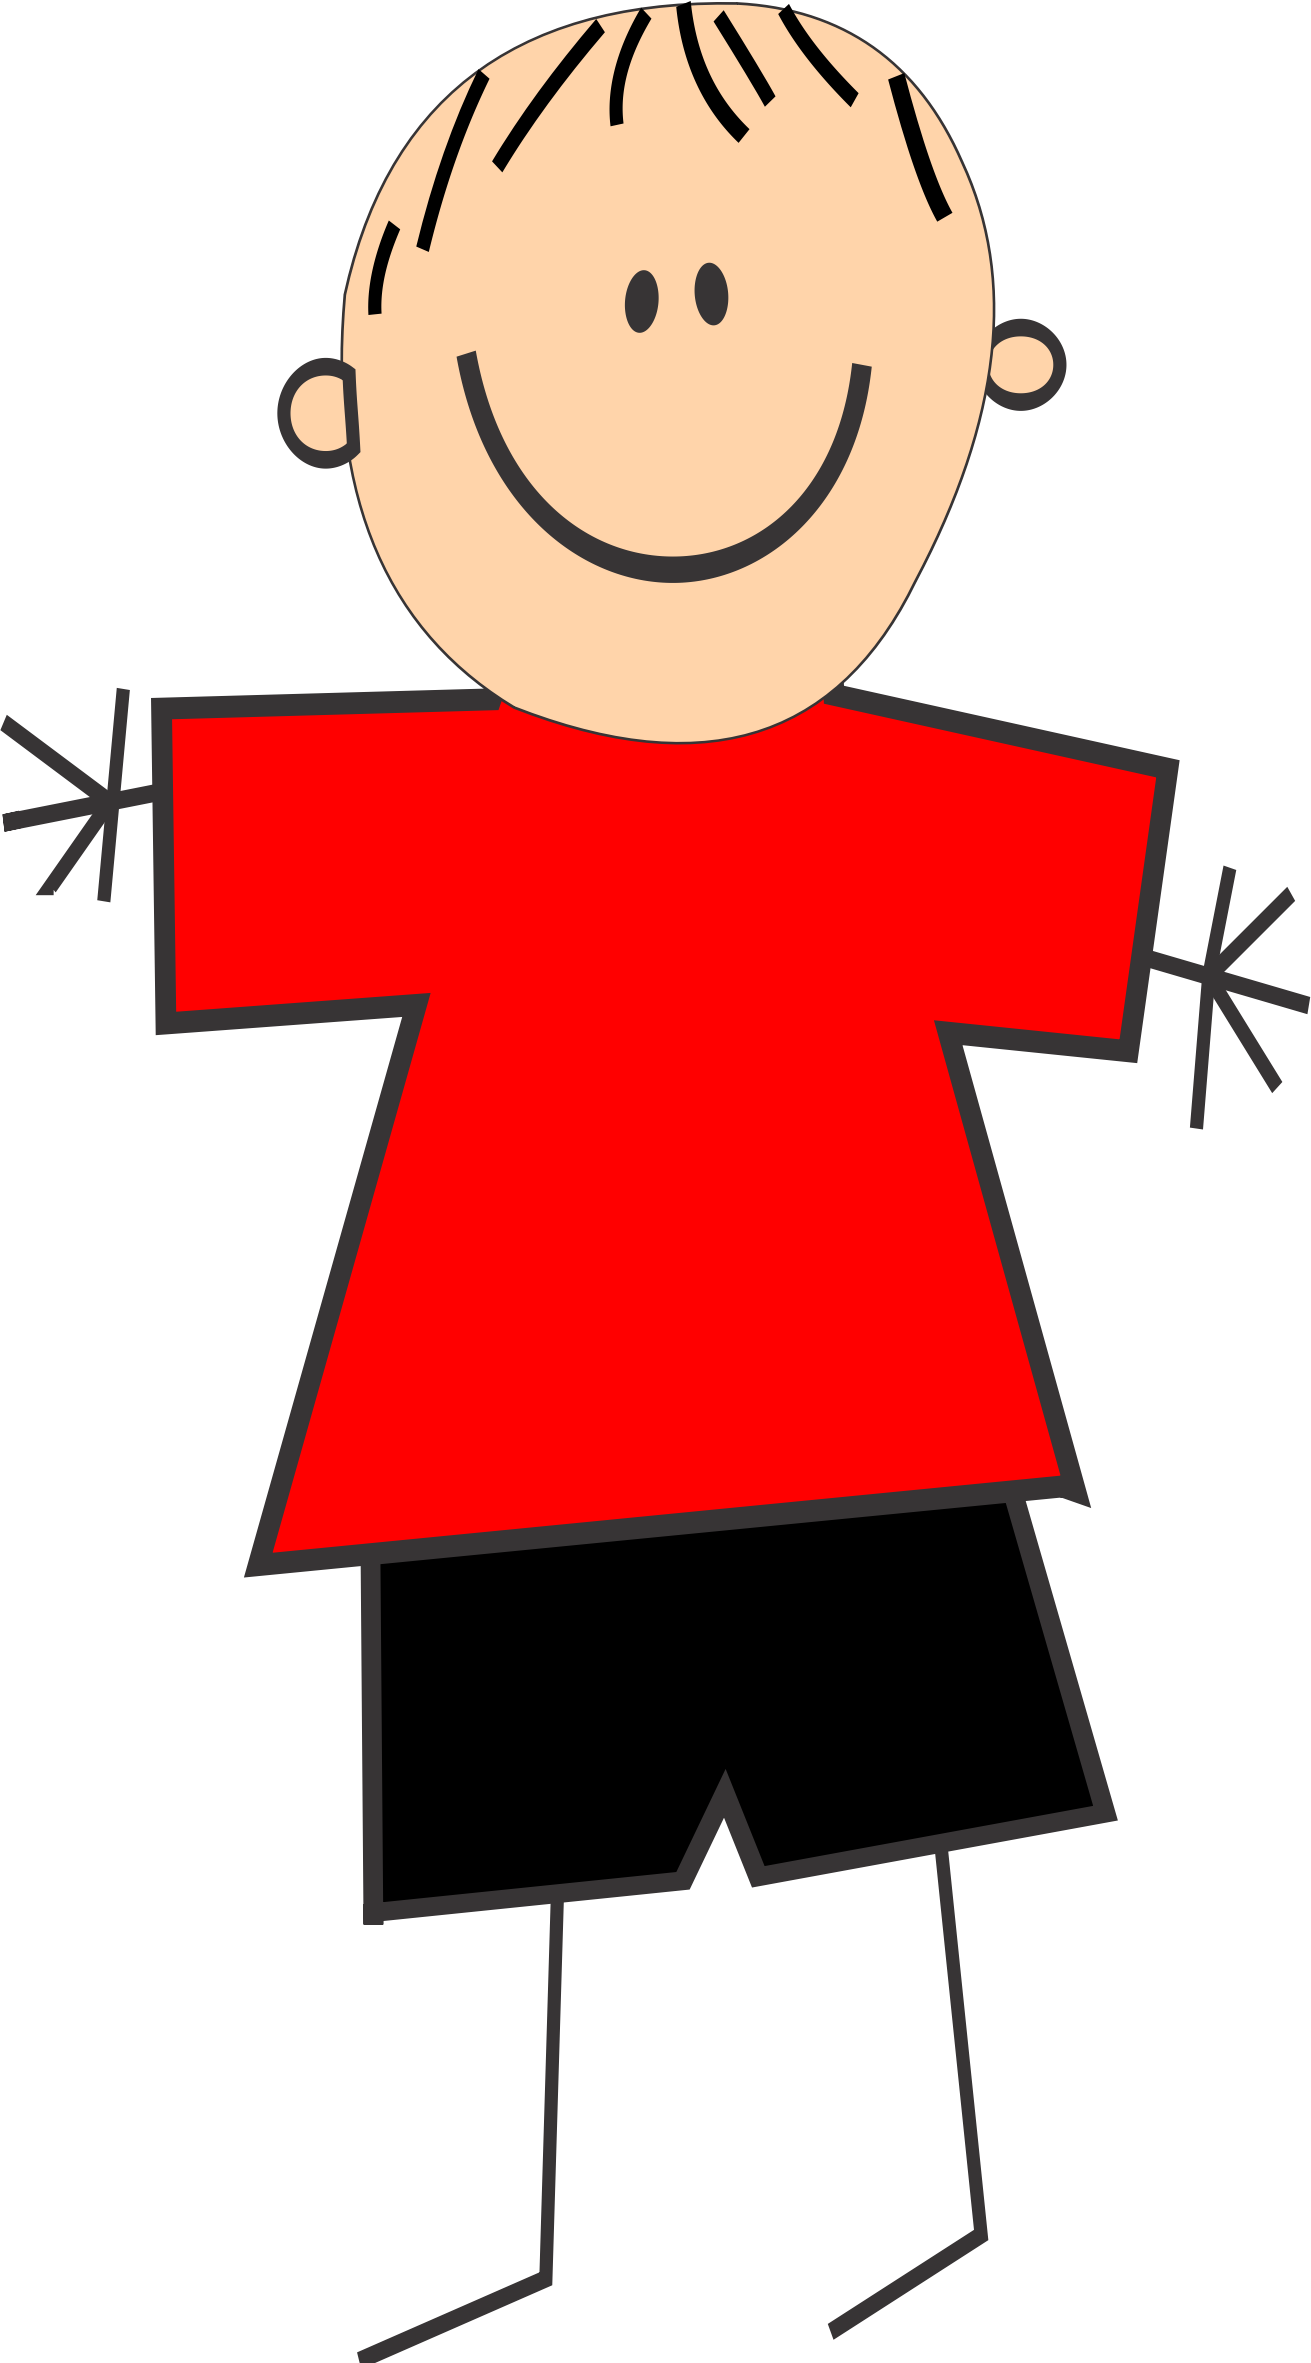 With Red Shirt - Boy With Red Shirt Clipart (1311x2363)